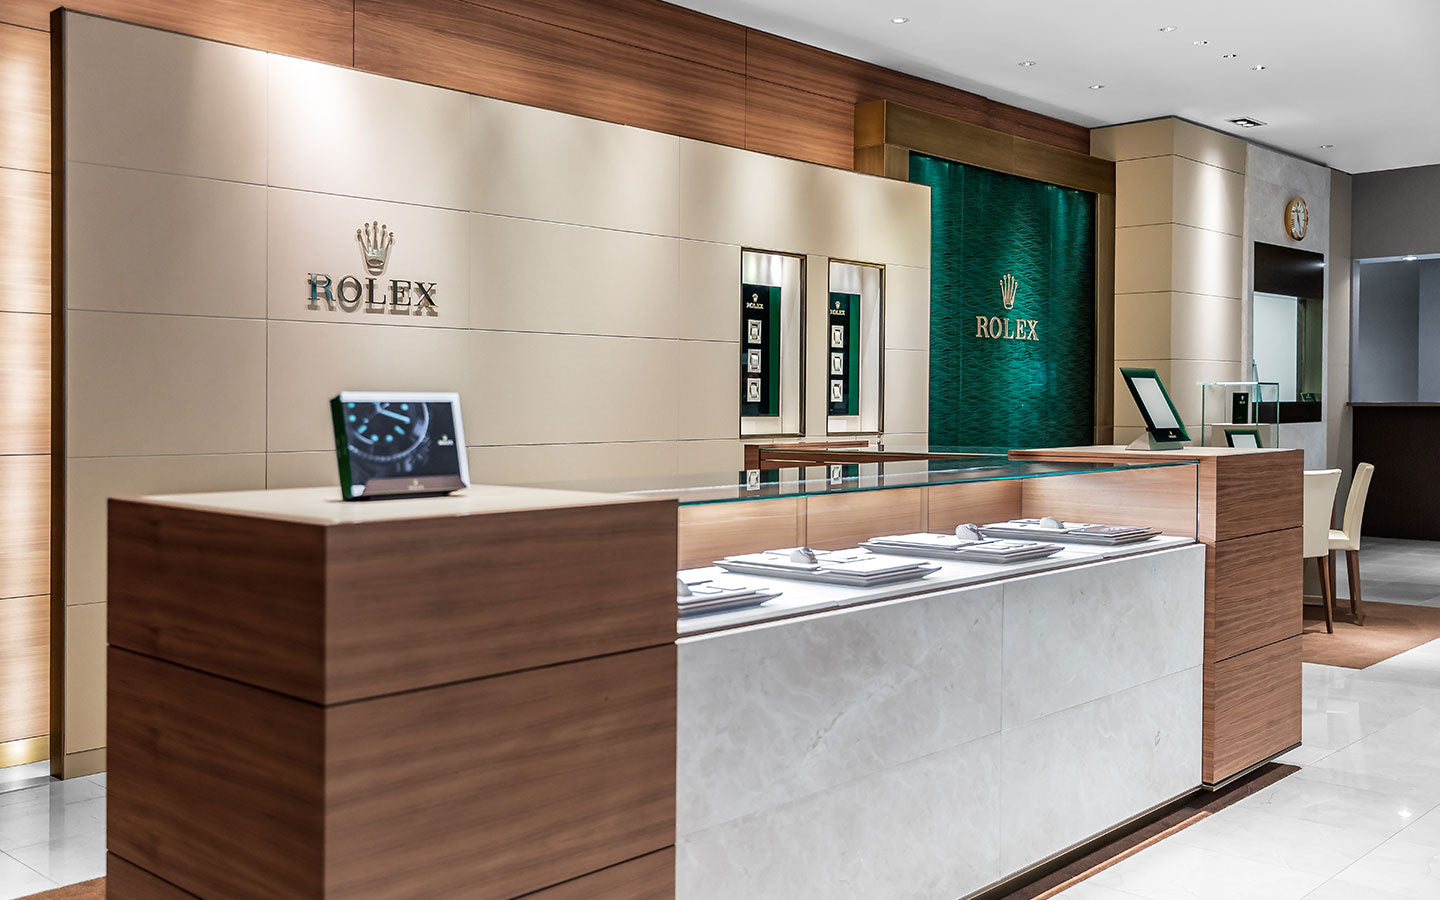 Rolex Watches at Fink's Jewelers Durham, NC